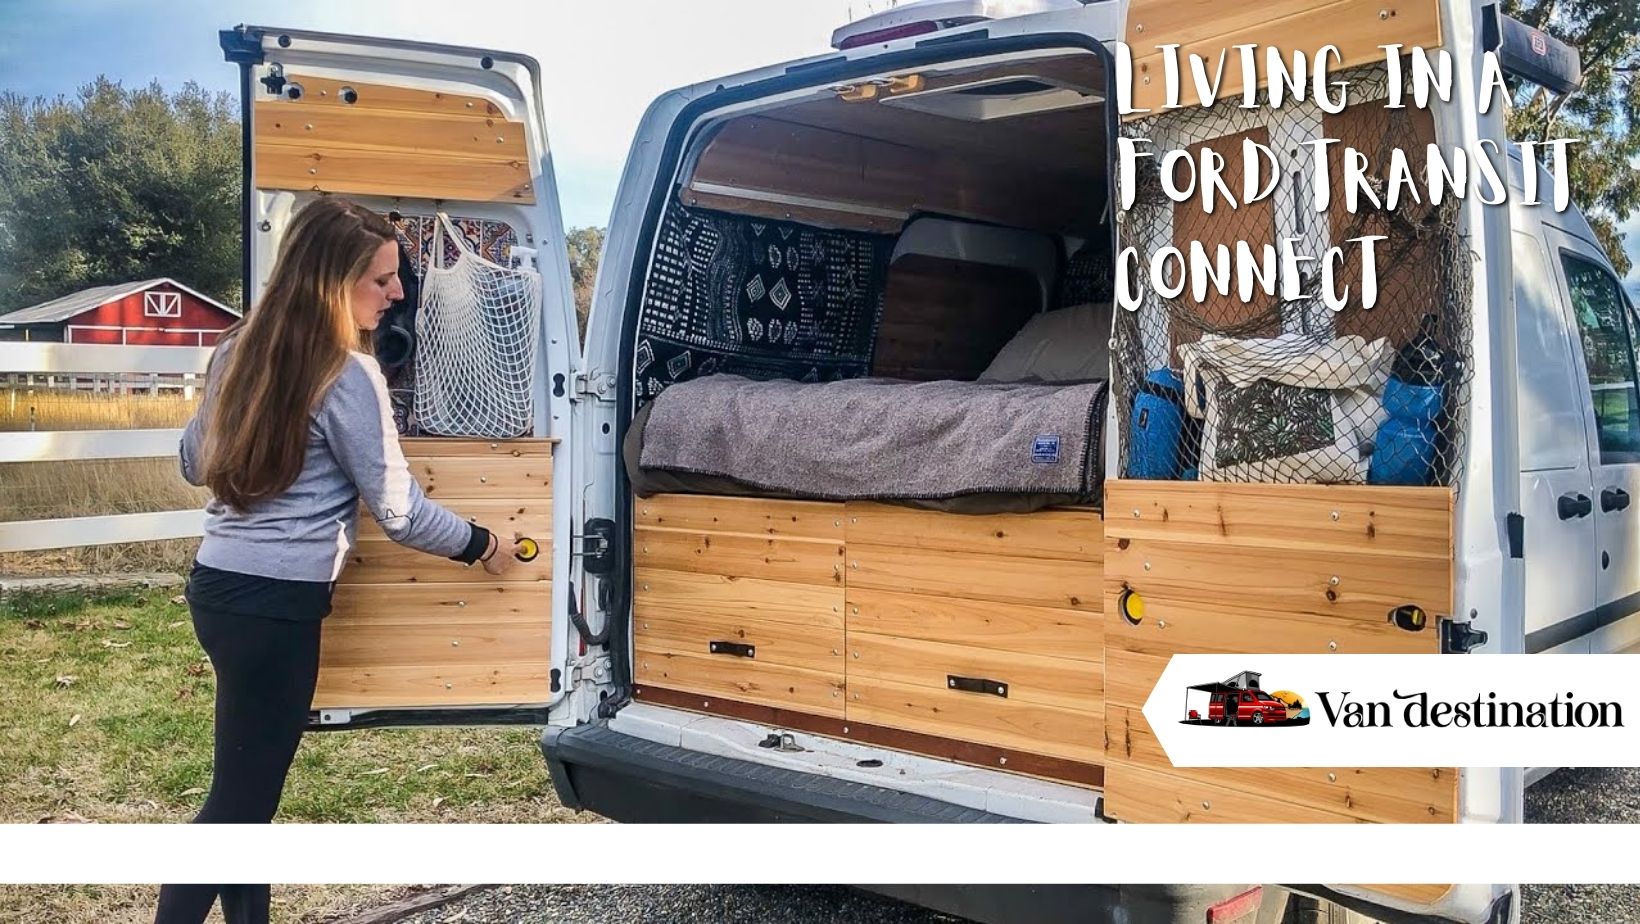 Living in a Ford Transit Connect